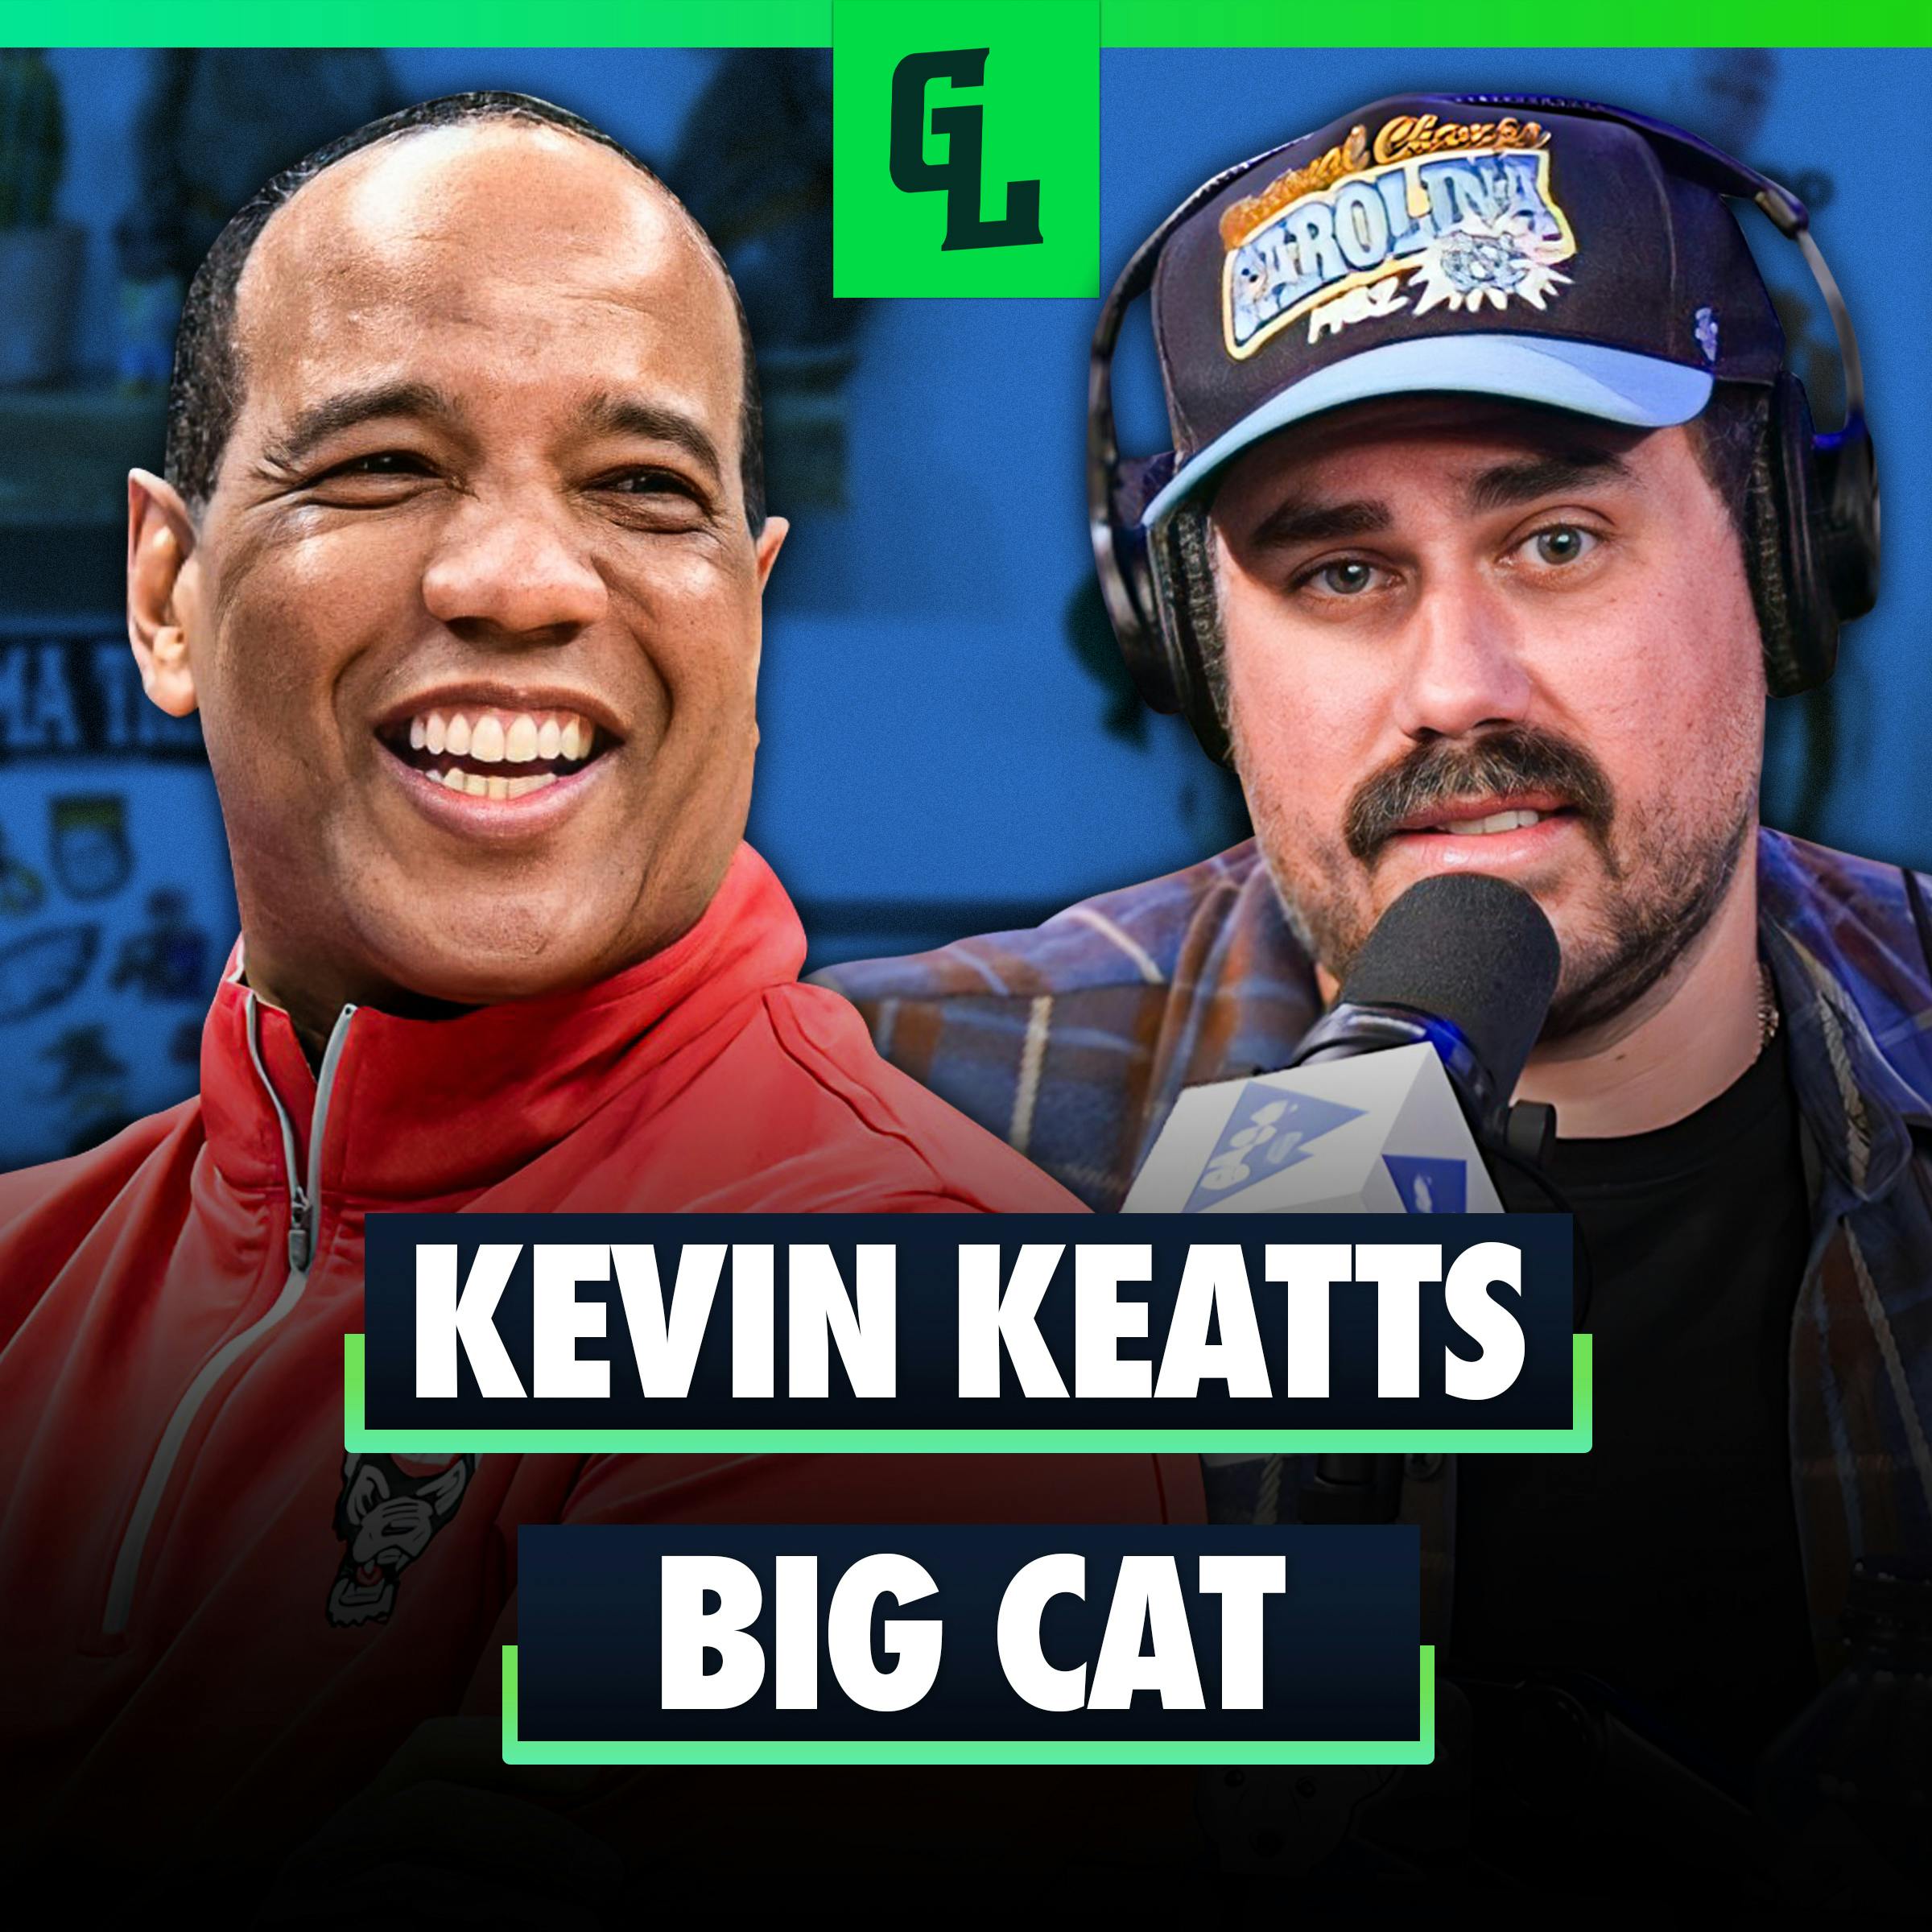 Big Cat! Kevin Keatts! NCAA Tournament Gambling, NC State in the Sweet 16 & Hip Drop Tackle Outlawed in the NFL